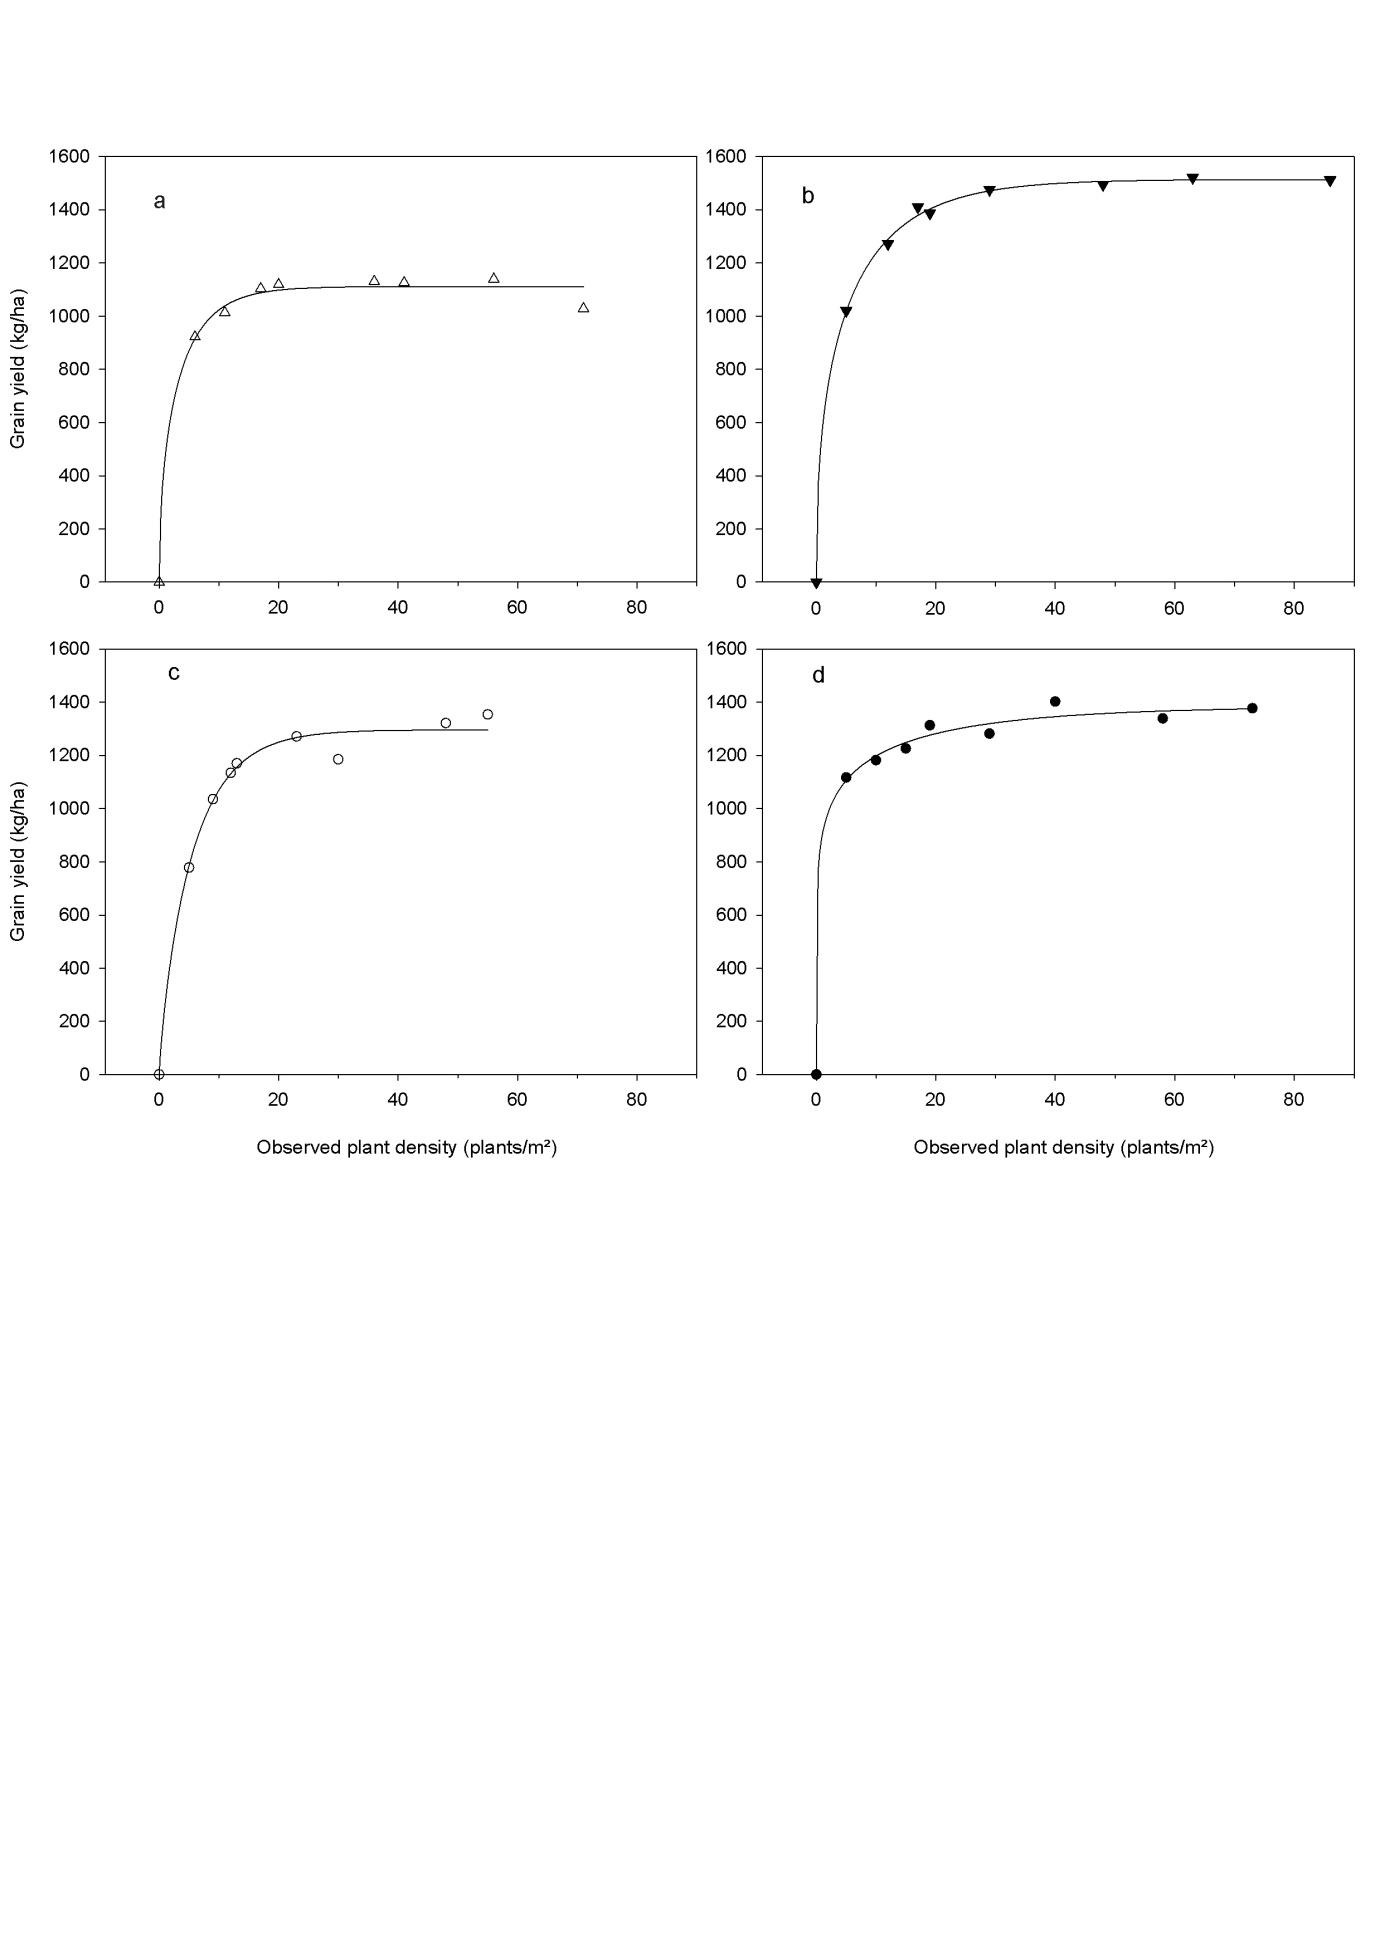 Figure 1 Relationship between plant density (observed, plants/m²) and the grain yield of (a) CB Telfer, (b) Hyola 450TT, (c) GT Viper and (d) Hyola 404RR at Salmon Gums in 2013 (13ED09)